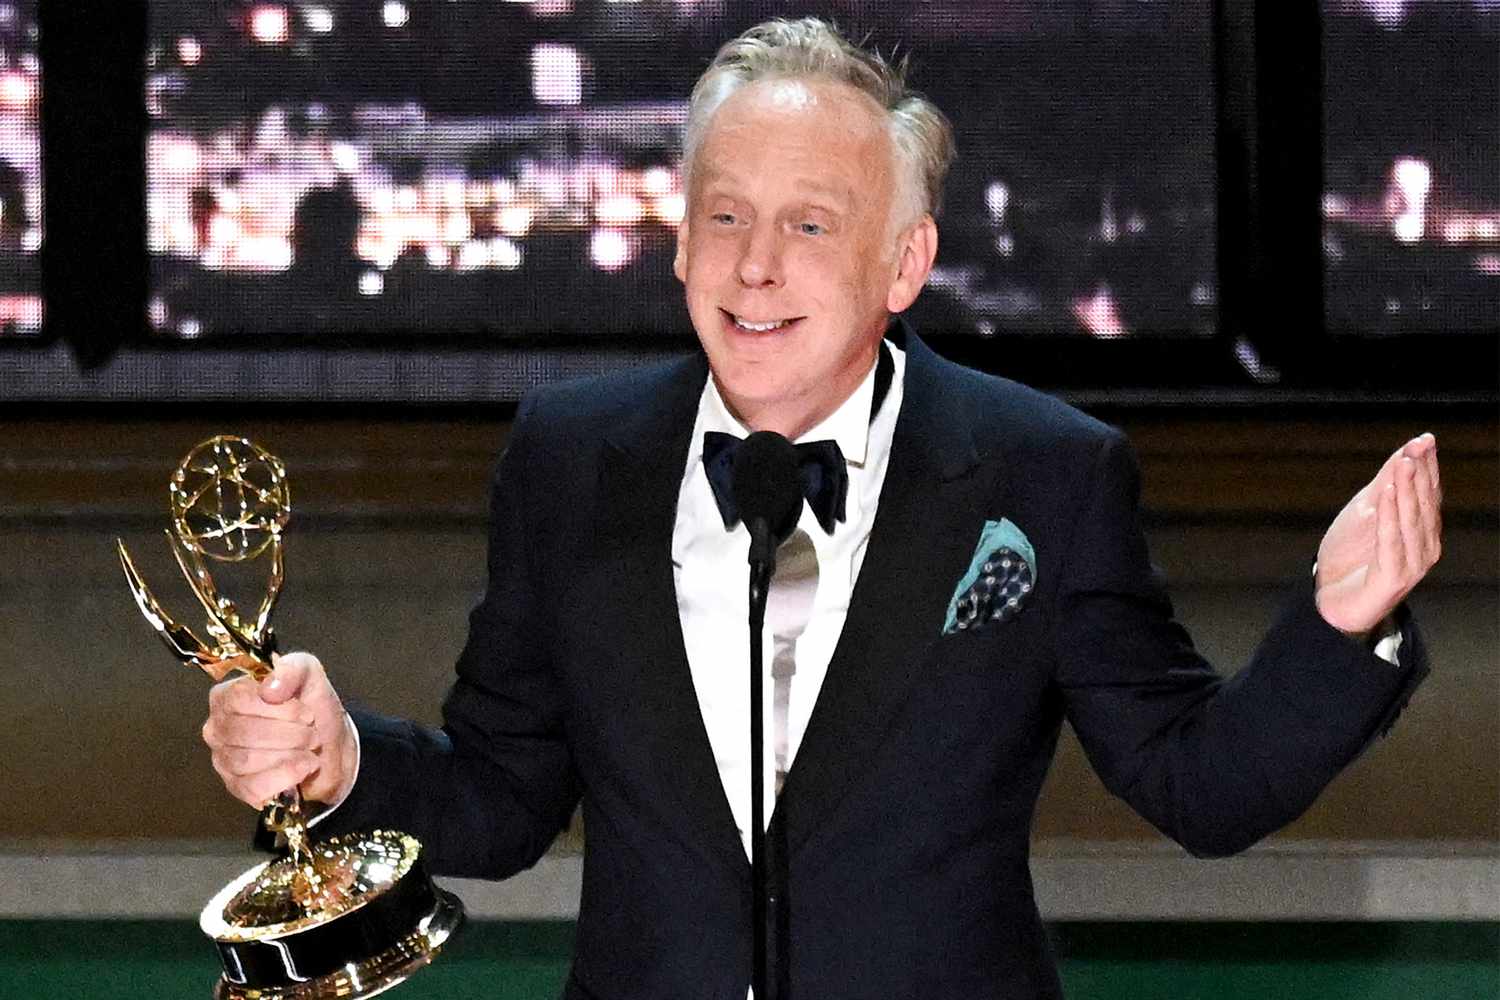 Mike White wins the Emmy for Outstanding Writing for a Limited Series or Anthology Series or Movie for 'The White Lotus'